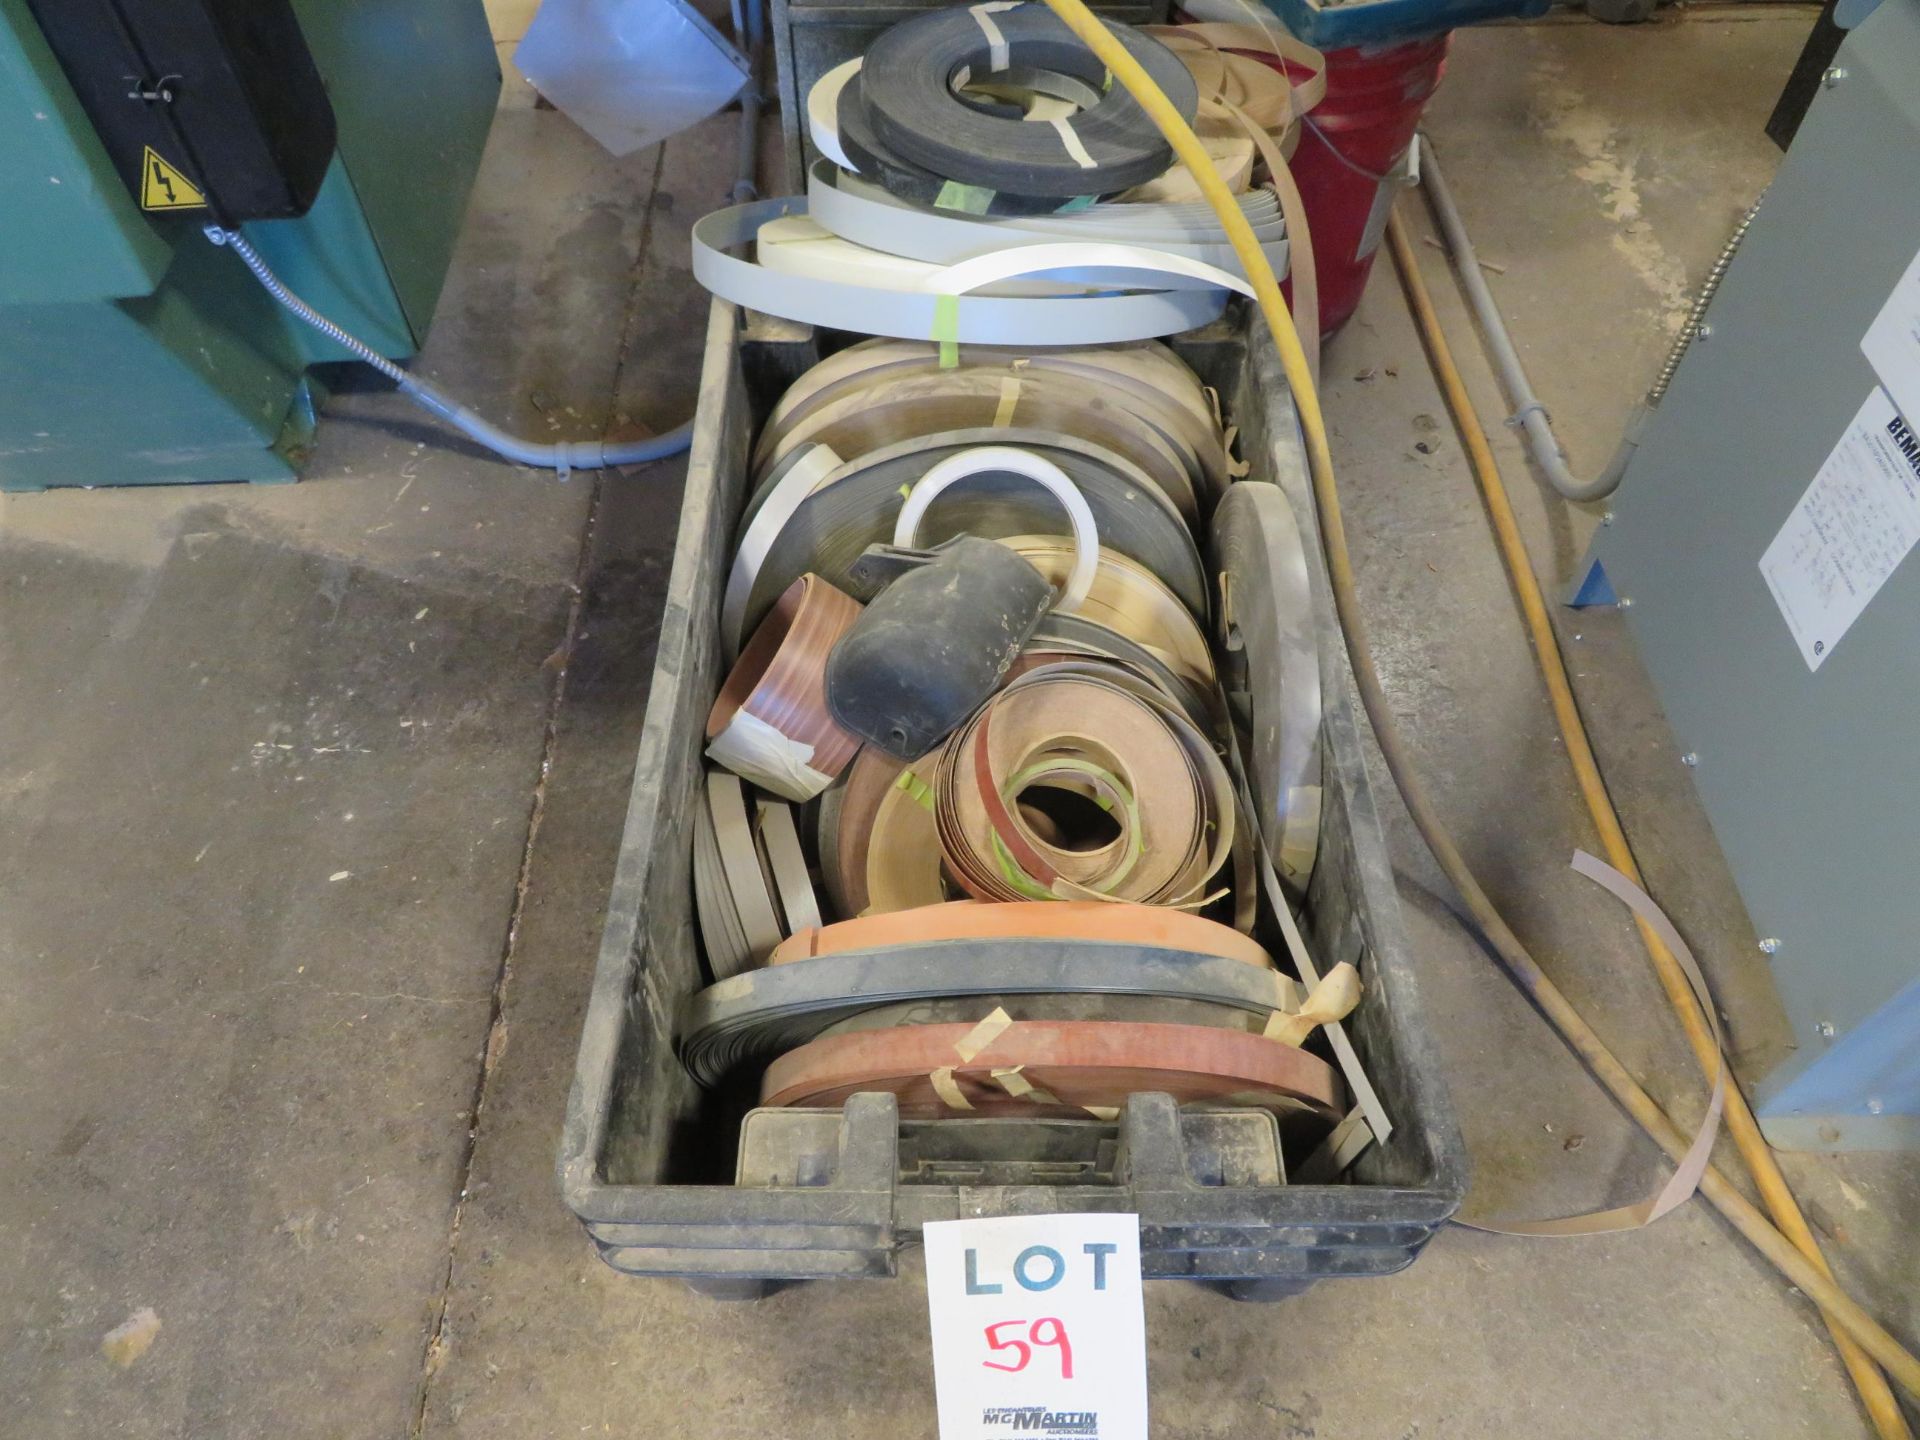 LOT including edgebanding rolls (qty 23), accessories, filing cabinet - Image 2 of 3